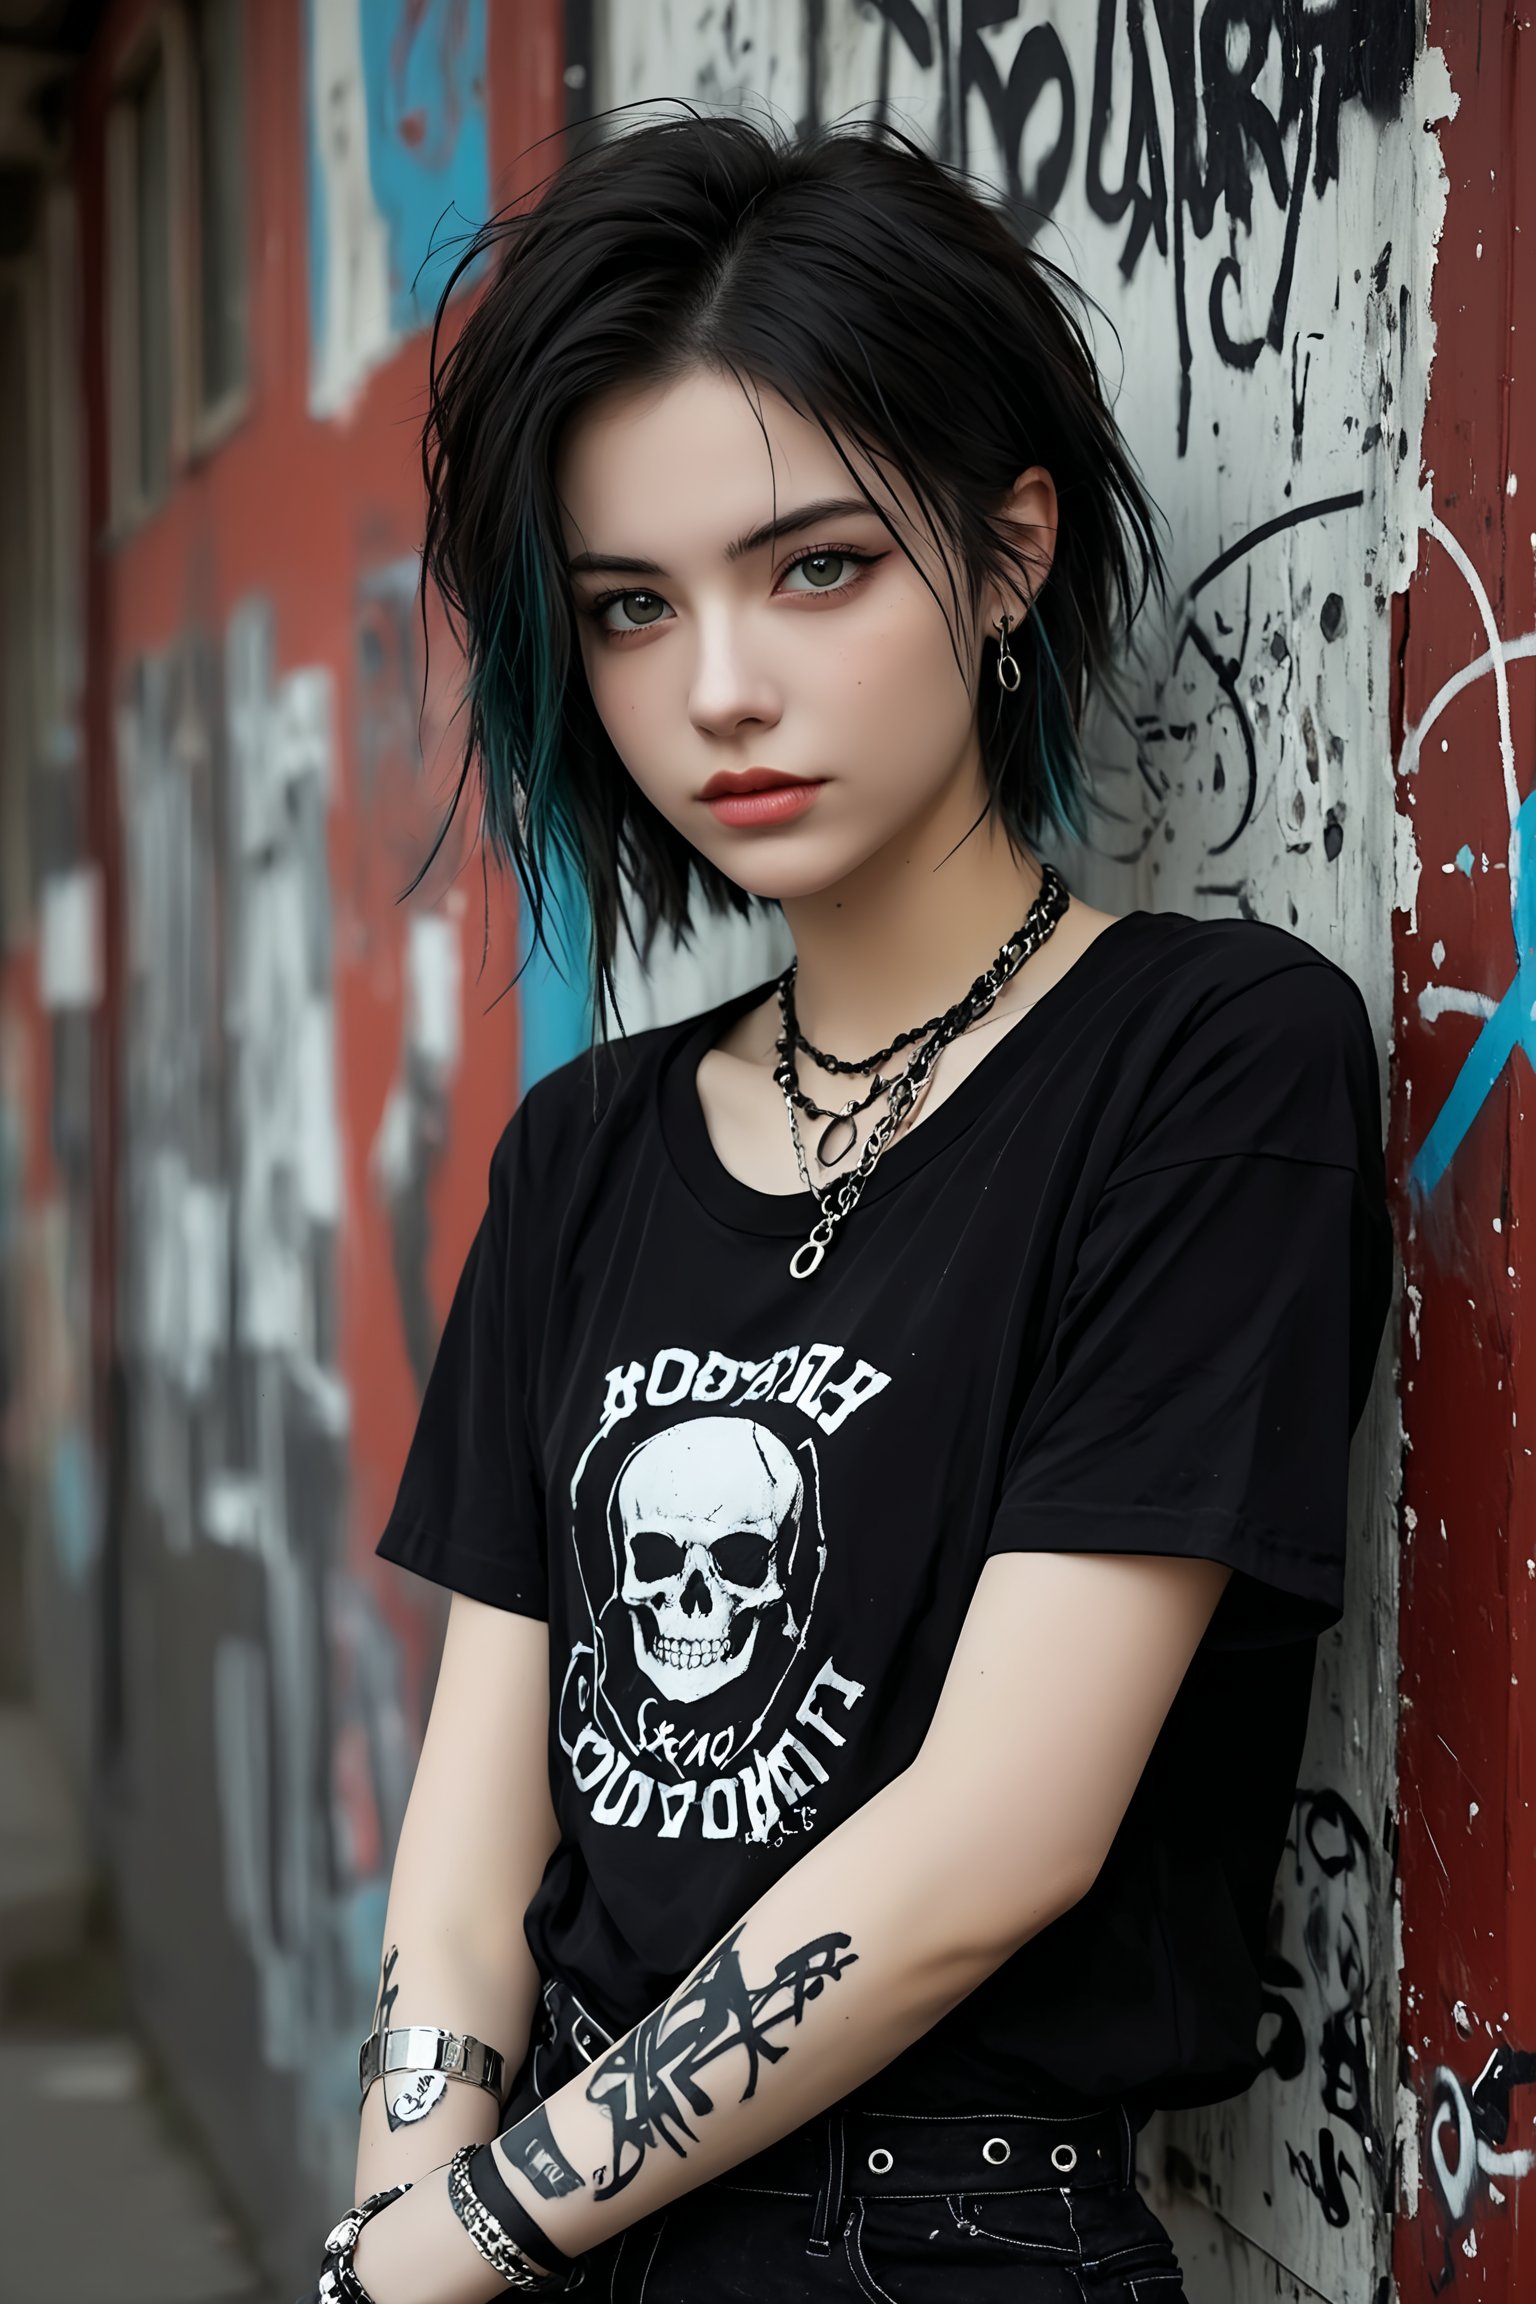 1 tomboy,Androgynous, boyish woman with emo-grunge fashion, Short, tousled dark hair with colorful streaks. Striking features, minimal makeup with dark eyeliner, Pale skin,ear piercings,
Outfit:Oversized distressed band t-shirt,Ripped black skinny jeans,Heavy combat boots,Layered silver necklaces and bracelets, slight smirk. Urban background, graffiti wall,
Style: High contrast photography, moody lighting. Gritty texture, desaturated colors except for hair highlights. Focus on subject's face and outfit details,goth girl,4k